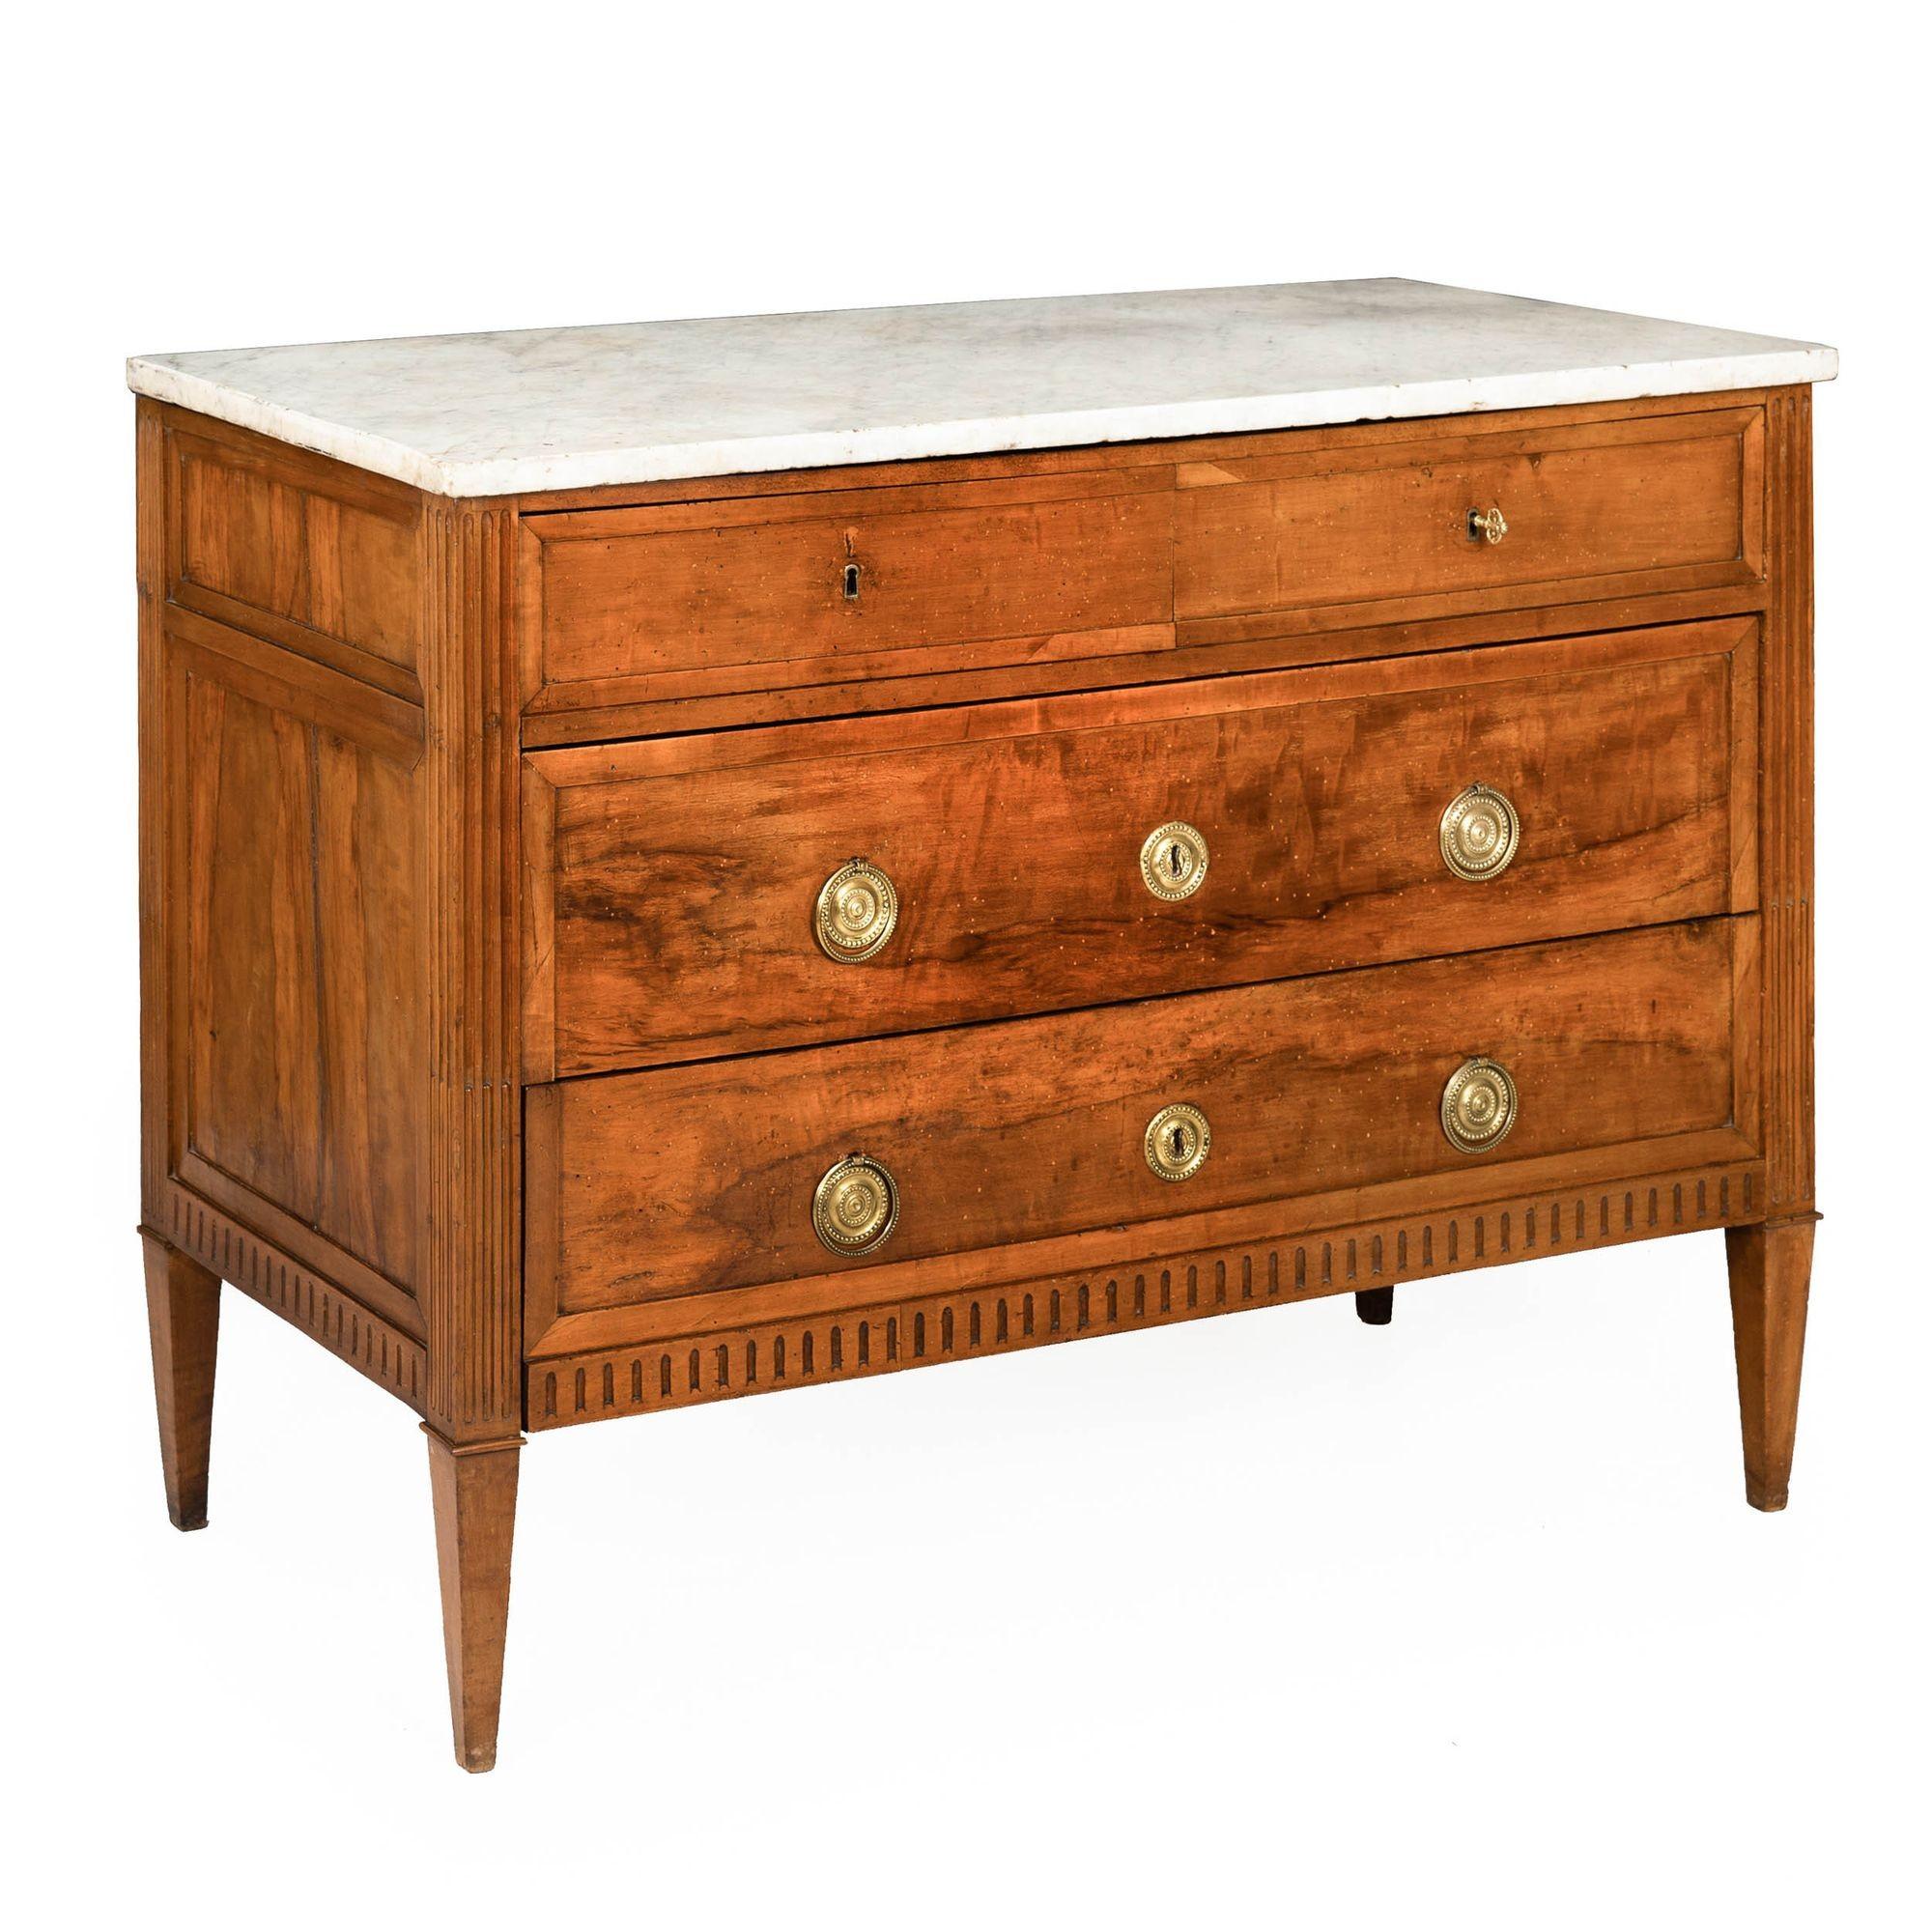 French Neoclassical Provincial Chest of Drawers Commode circa 1800 For Sale 15